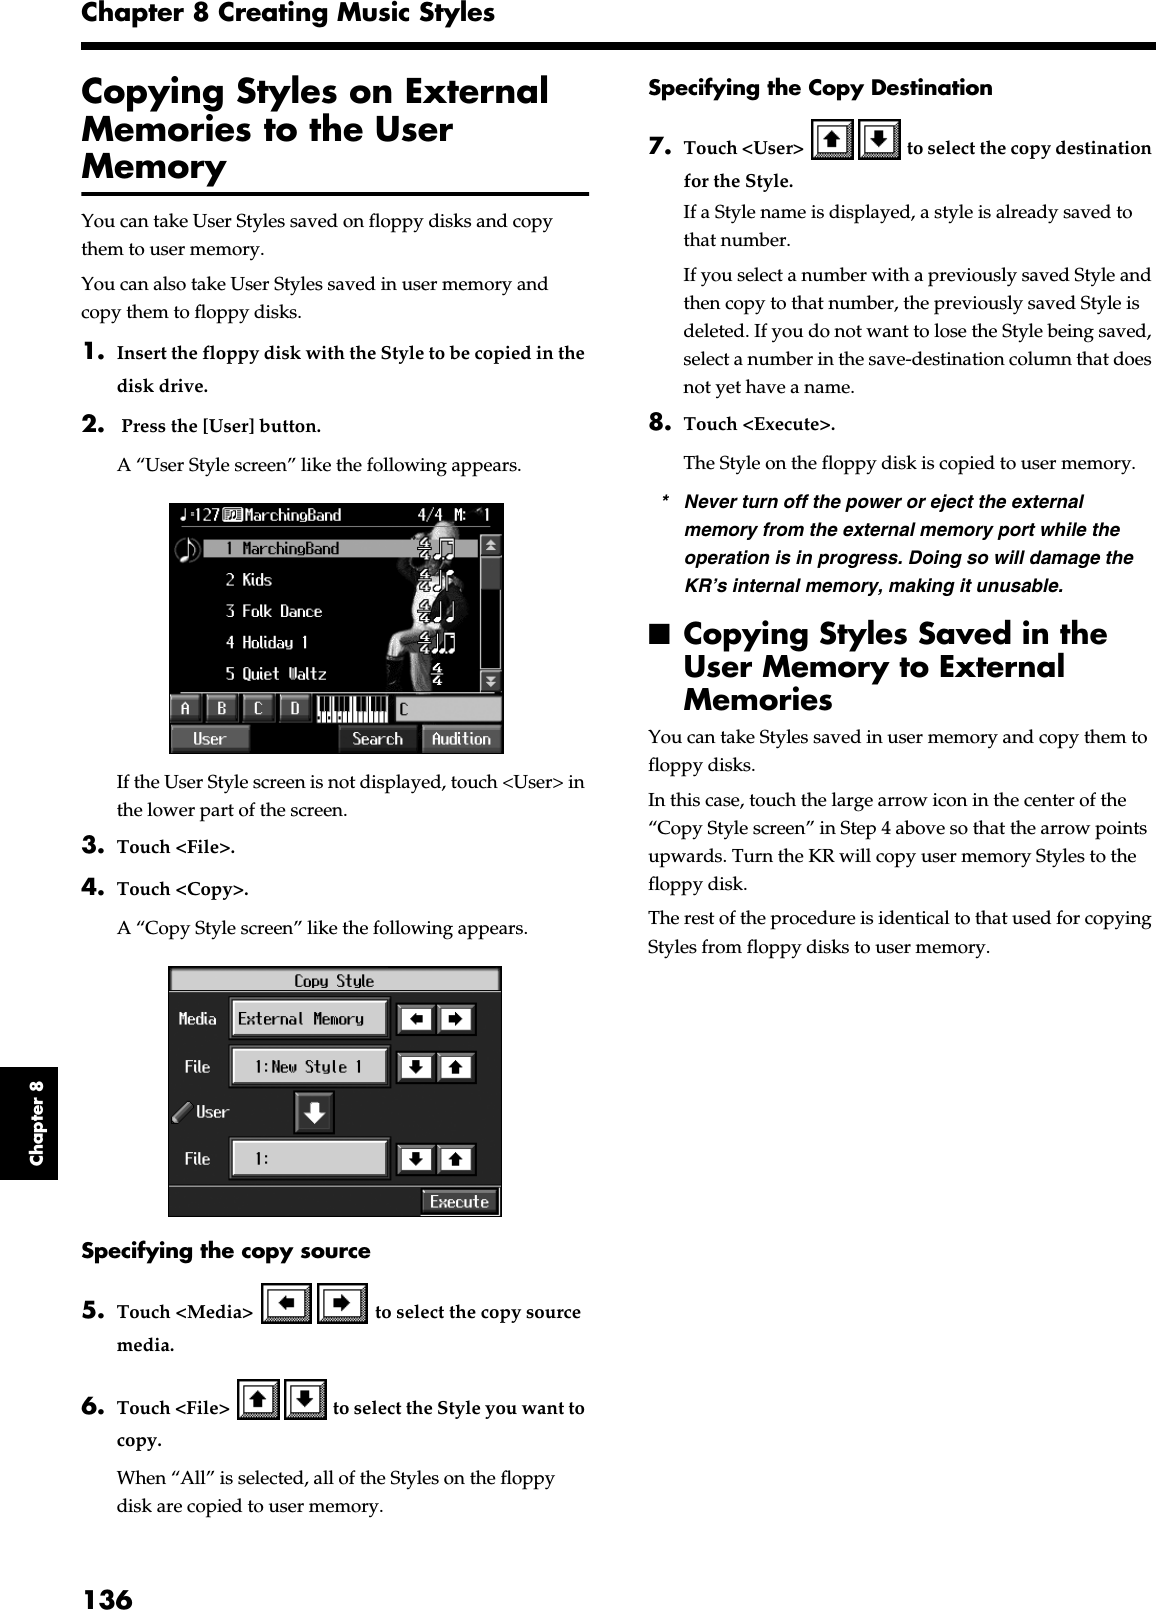 136Chapter 8 Creating Music StylesChapter 8Copying Styles on External Memories to the User MemoryYou can take User Styles saved on floppy disks and copy them to user memory.You can also take User Styles saved in user memory and copy them to floppy disks.1. Insert the floppy disk with the Style to be copied in the disk drive.2.  Press the [User] button.A “User Style screen” like the following appears.fig.d-usrdisk.eps_50If the User Style screen is not displayed, touch &lt;User&gt; in the lower part of the screen.3. Touch &lt;File&gt;. 4. Touch &lt;Copy&gt;.A “Copy Style screen” like the following appears.fig.d-copystyle.eps_50Specifying the copy source5. Touch &lt;Media&gt;   to select the copy source media.6. Touch &lt;File&gt;   to select the Style you want to copy. When “All” is selected, all of the Styles on the floppy disk are copied to user memory.Specifying the Copy Destination7. Touch &lt;User&gt;   to select the copy destination for the Style.If a Style name is displayed, a style is already saved to that number.If you select a number with a previously saved Style and then copy to that number, the previously saved Style is deleted. If you do not want to lose the Style being saved, select a number in the save-destination column that does not yet have a name.8. Touch &lt;Execute&gt;.The Style on the floppy disk is copied to user memory.* Never turn off the power or eject the external memory from the external memory port while the operation is in progress. Doing so will damage the KR’s internal memory, making it unusable.■Copying Styles Saved in the User Memory to External MemoriesYou can take Styles saved in user memory and copy them to floppy disks.In this case, touch the large arrow icon in the center of the “Copy Style screen” in Step 4 above so that the arrow points upwards. Turn the KR will copy user memory Styles to the floppy disk.The rest of the procedure is identical to that used for copying Styles from floppy disks to user memory.